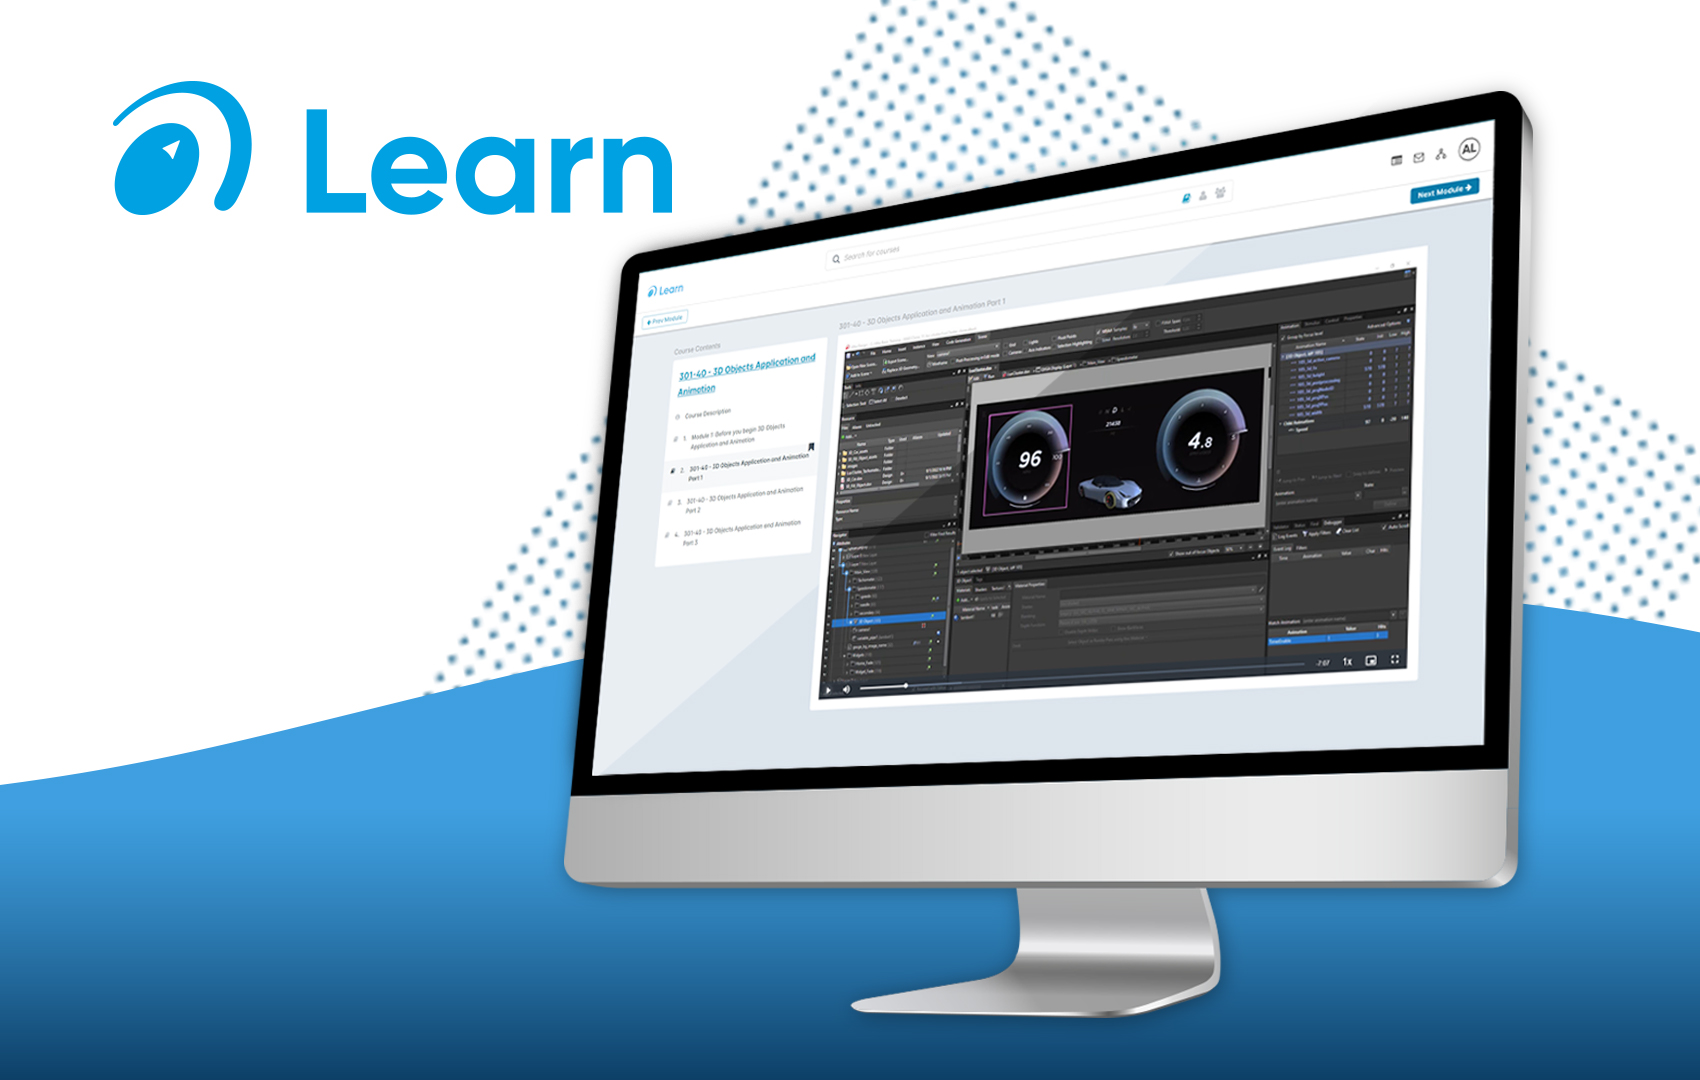 Altia Announces Altia Learn, New eLearning Portal with On-Demand GUI Development Software Training Resources